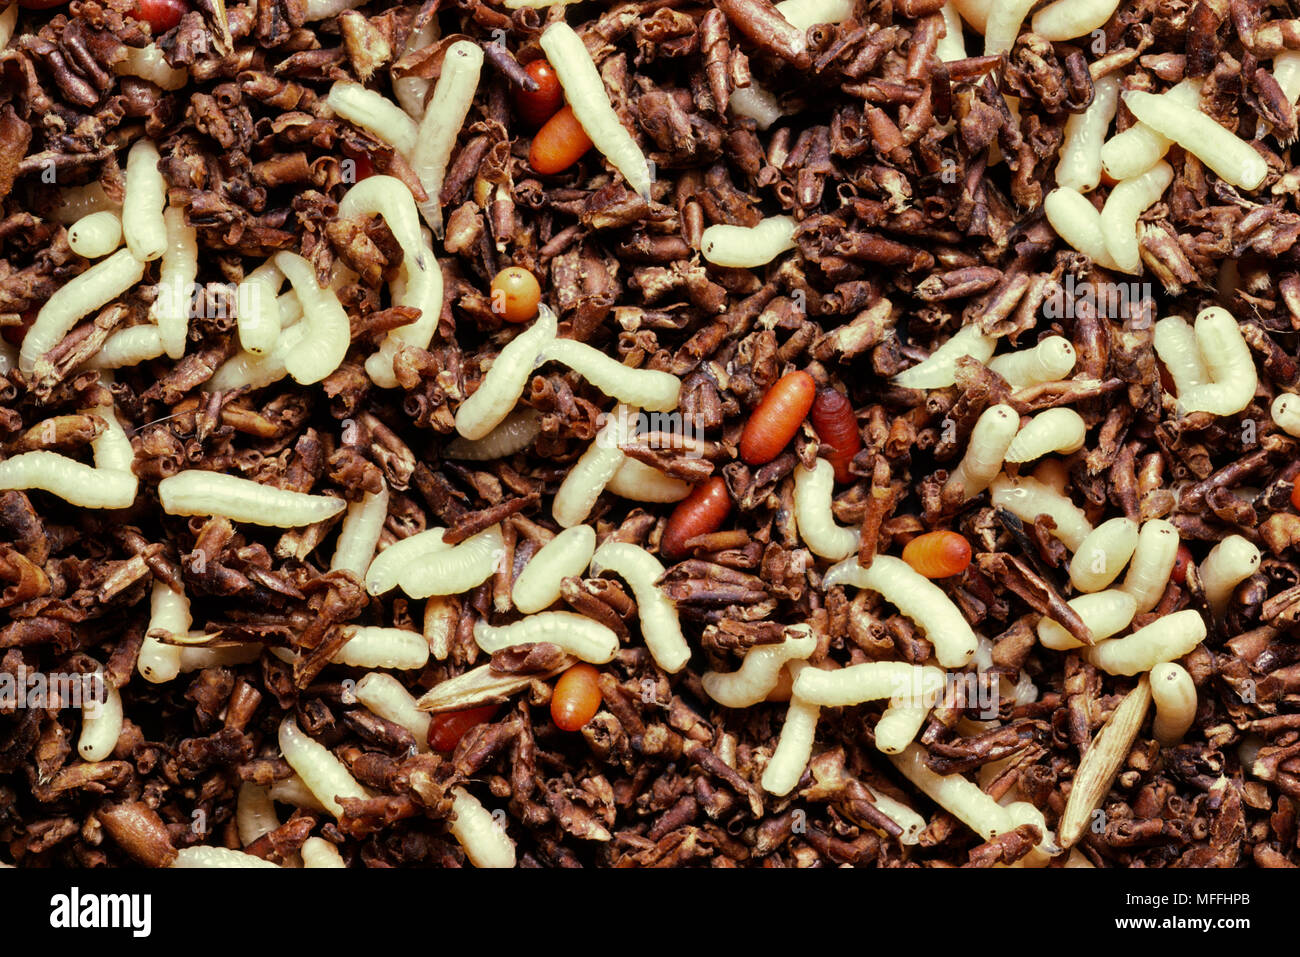 COMMON HOUSEFLY larvae & pupae  Musca domestica   (One of main disease-carriers in Africa) Stock Photo